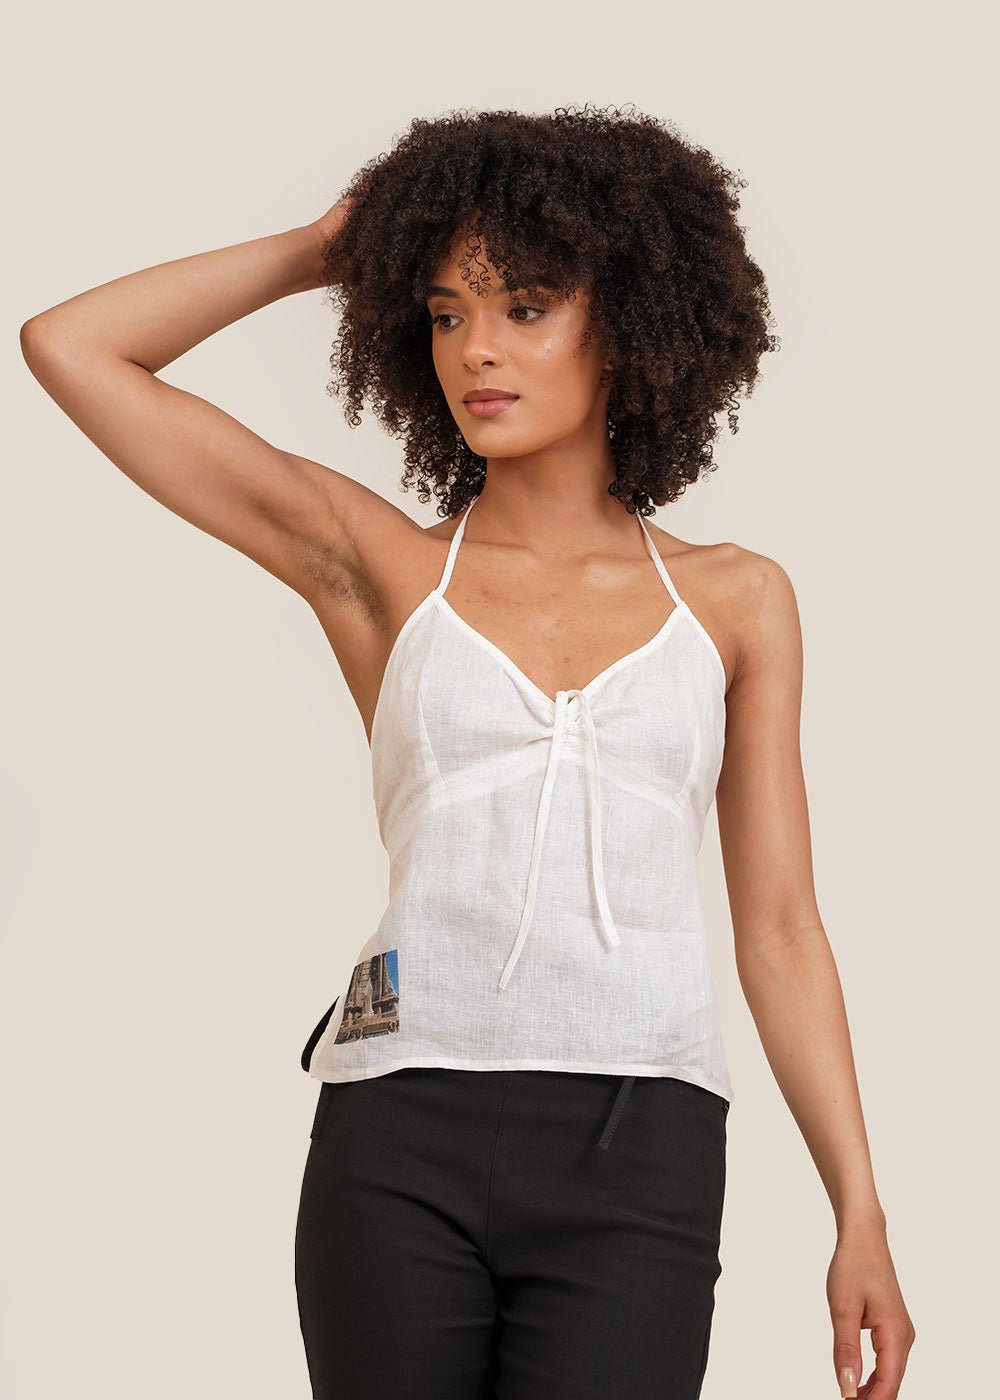 Paloma Wool Off-White Katie Top - New Classics Studios Sustainable Ethical Fashion Canada